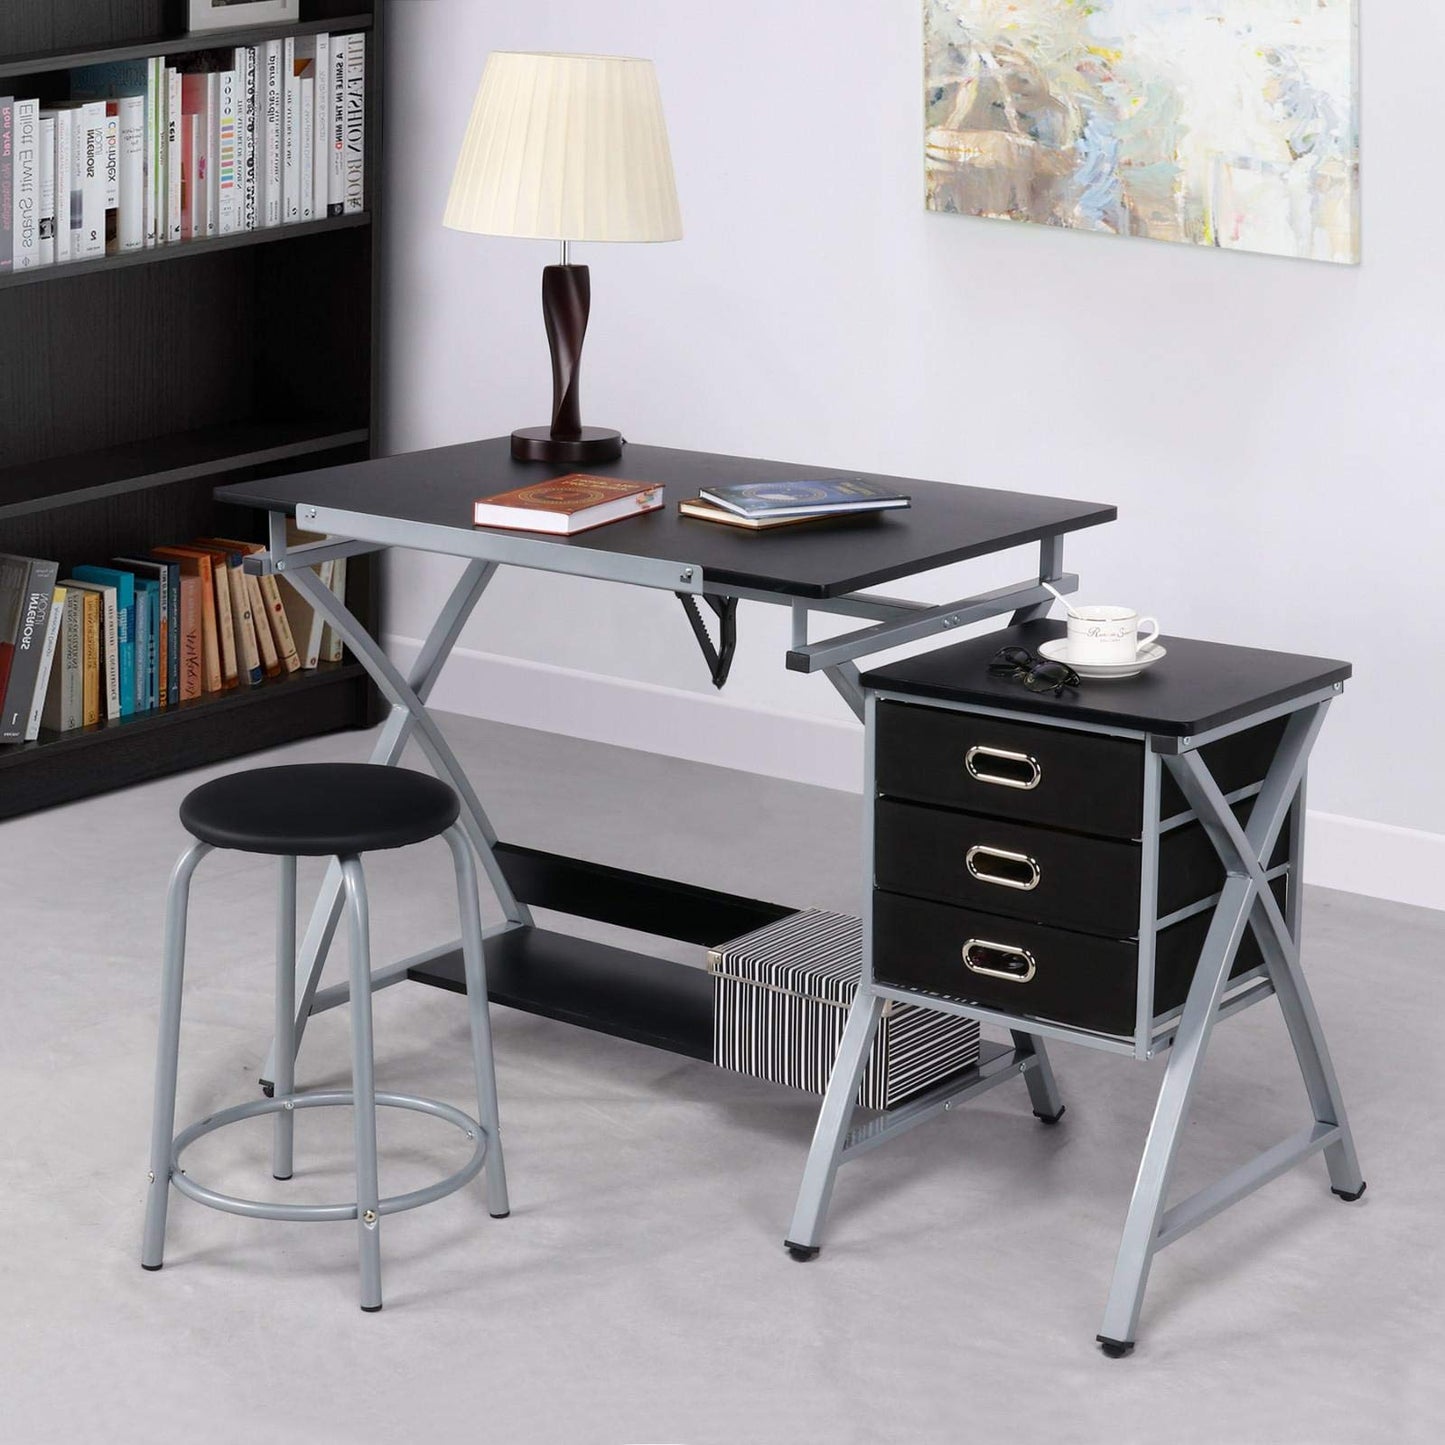 Topeakmart Drafting Tables, Draft Drawing Desk w/Stool and Tiltable Tabletop, 3 Storage Drawers, Reading, Writing Art Crafting Workstation, Black